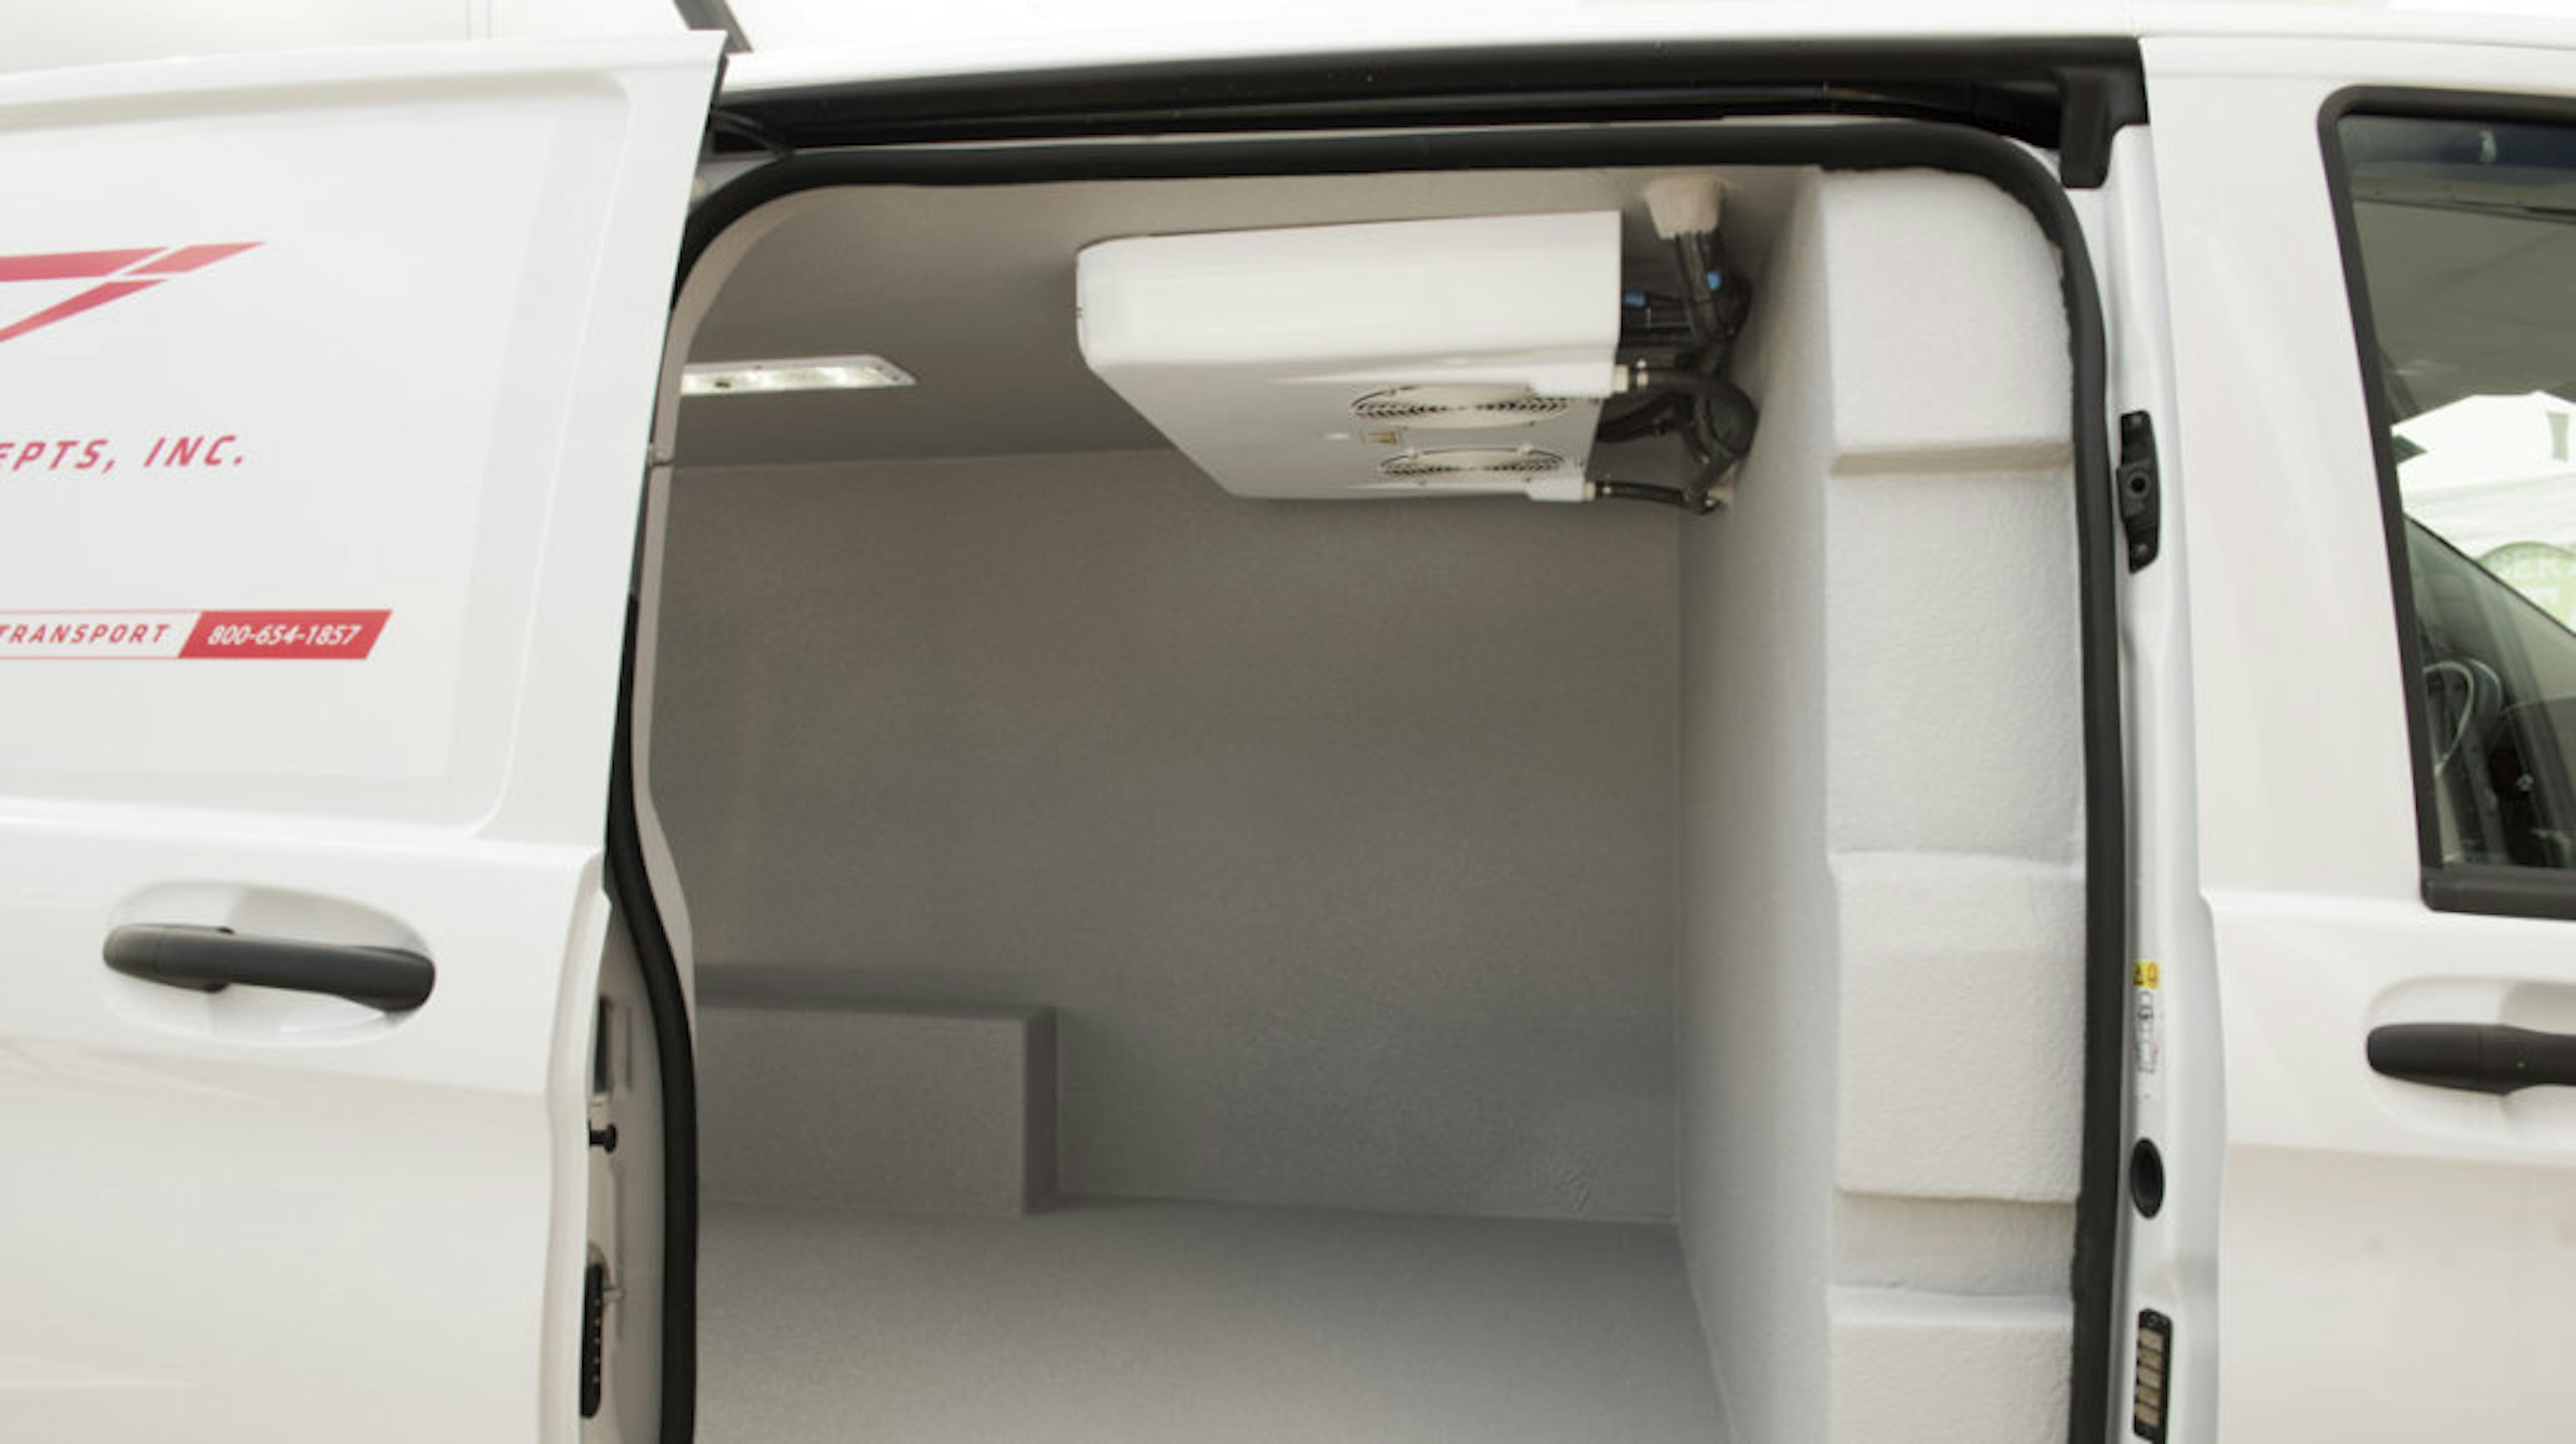 temperature controlled van with side access